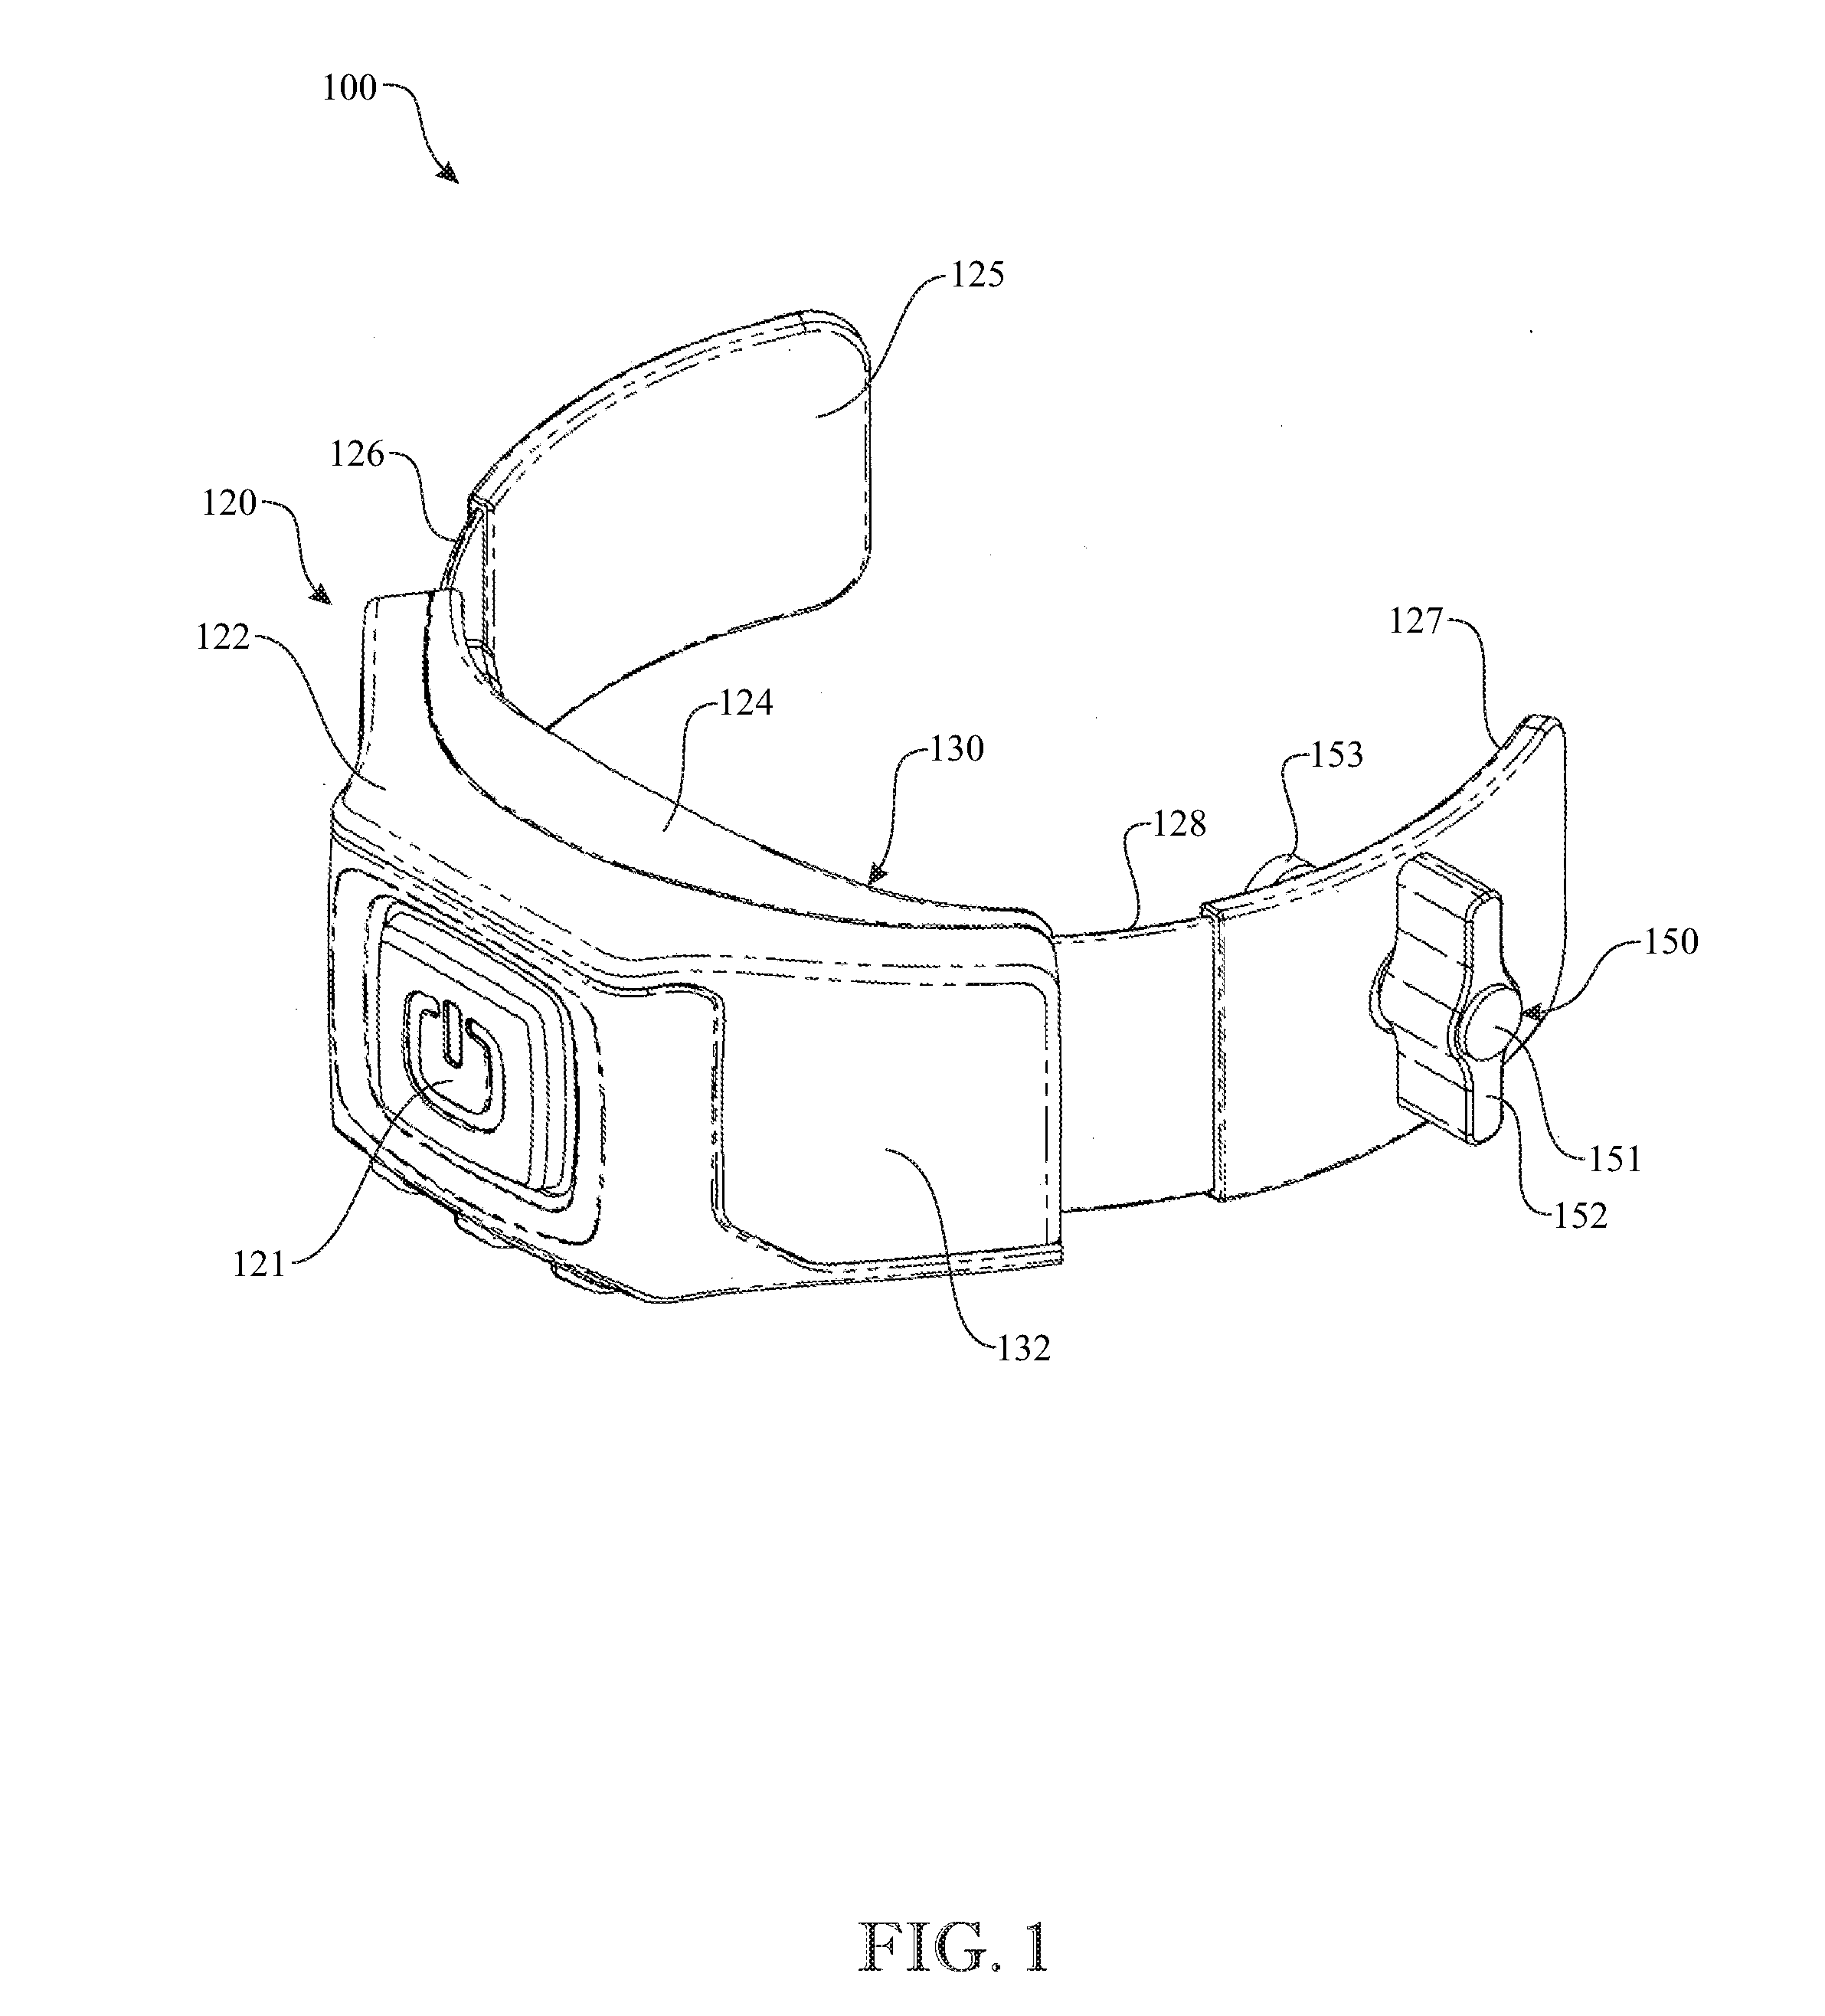 Audio signal amplification apparatus and method of use